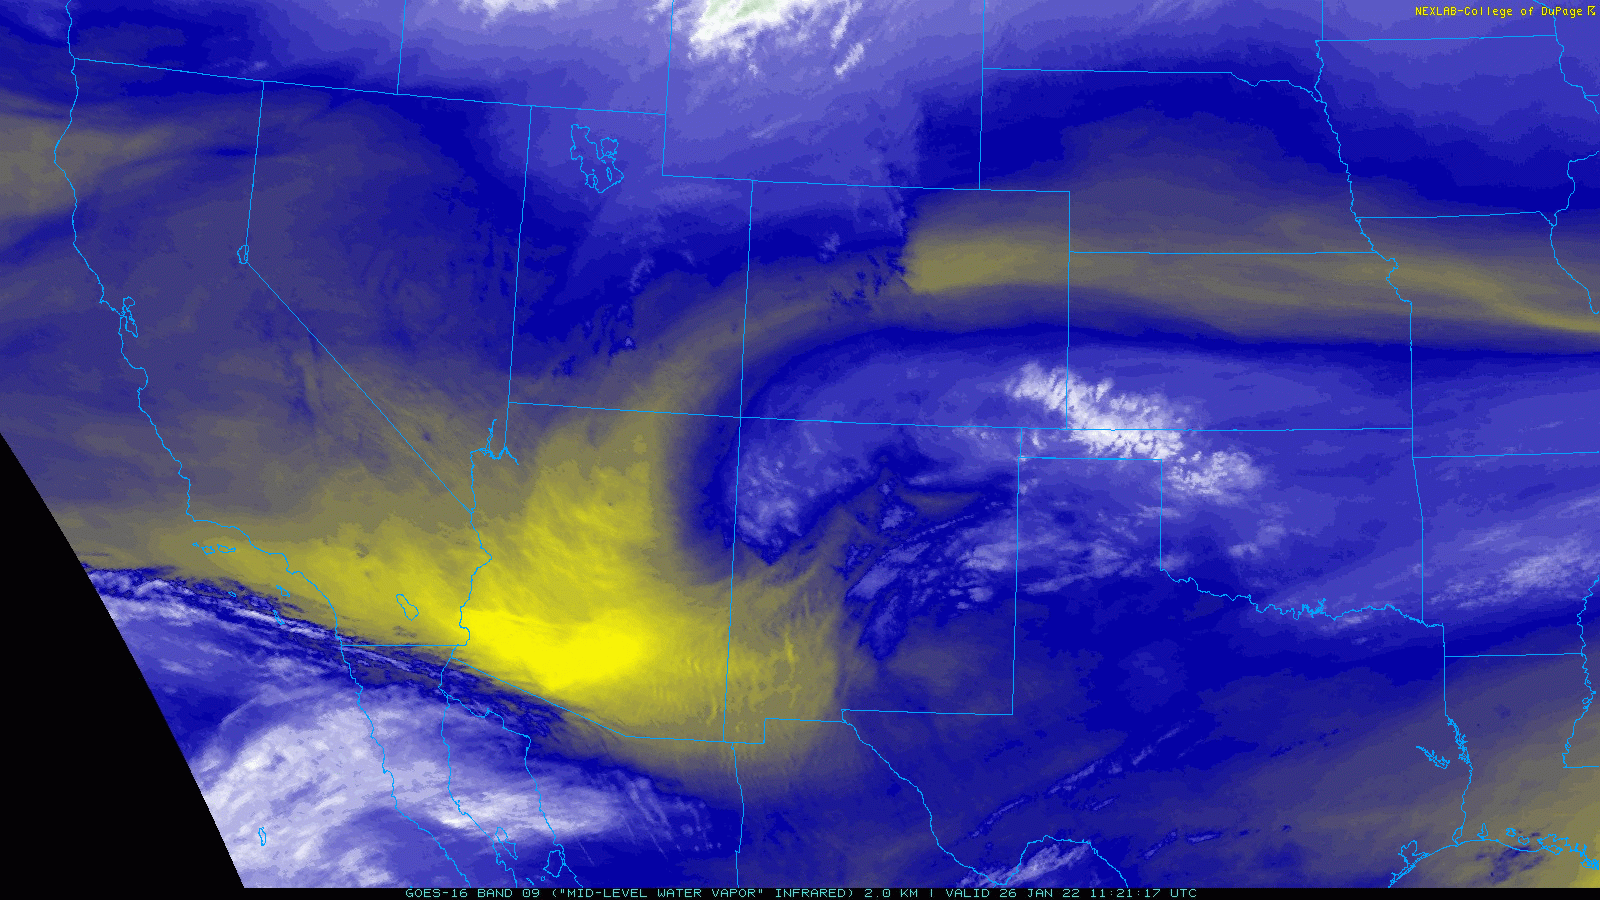 Water vapor imagery loop valid from 5:21 to 6:11 am on 26 January 2022. A well-defined system is seen approaching West Texas via New Mexico.